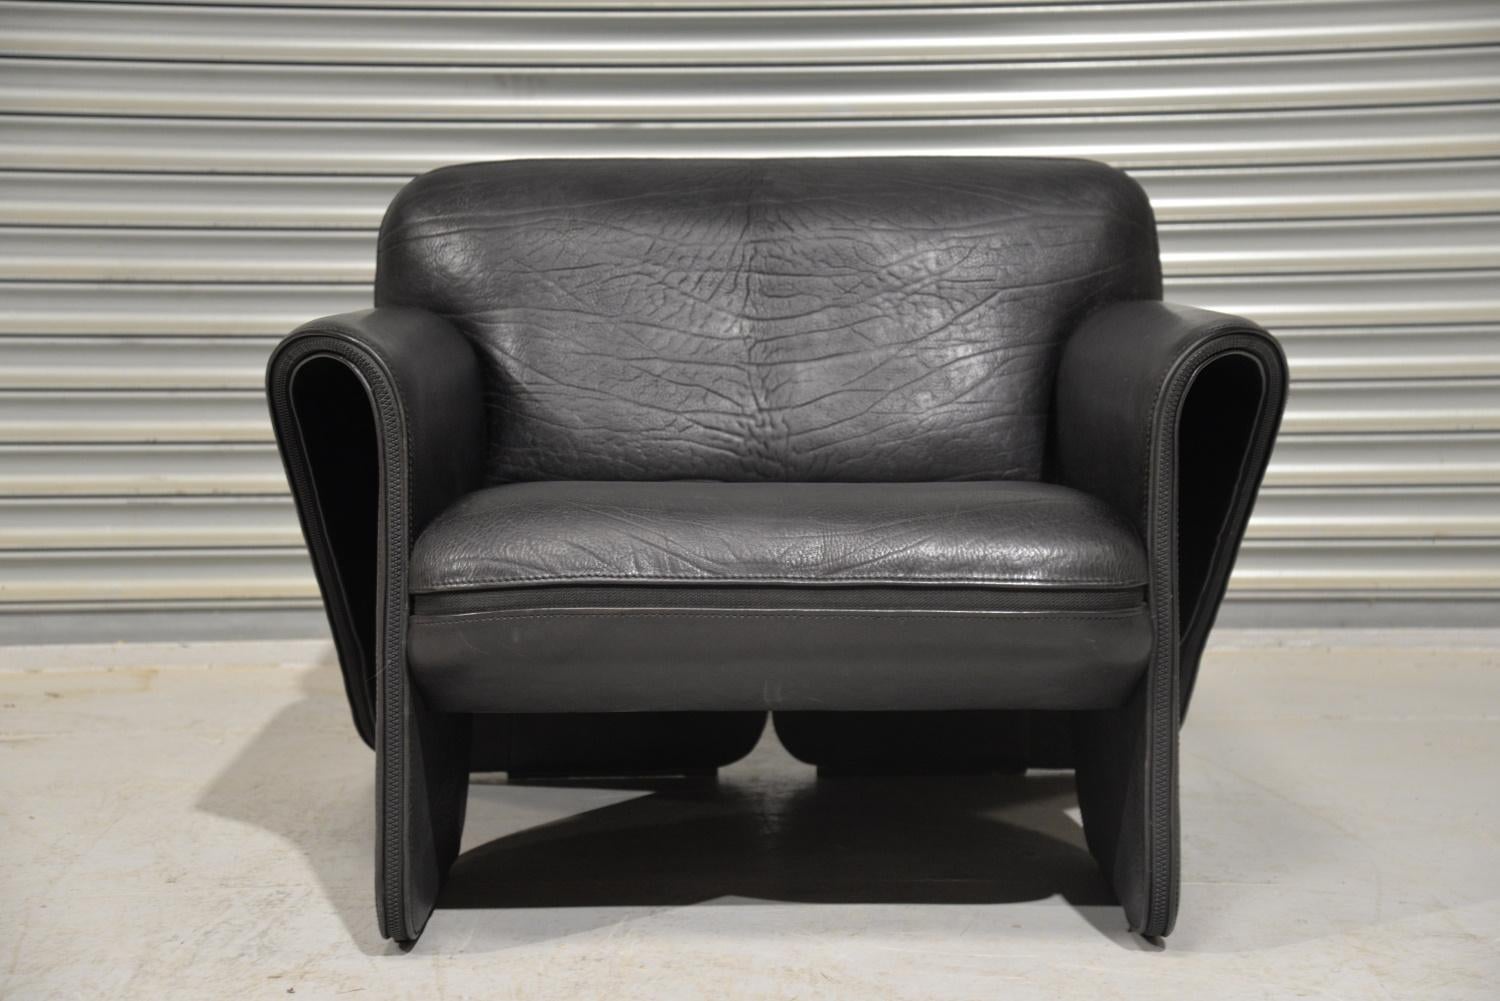 Ultra rare vintage De Sede DS 125 armchair by Gerd Lange in 1978. These sculptural pieces are upholstered in 3mm-5mm thick neck leather with a decorative zipper seam. This piece is in stunning black leather, extremely comfortable and presented in